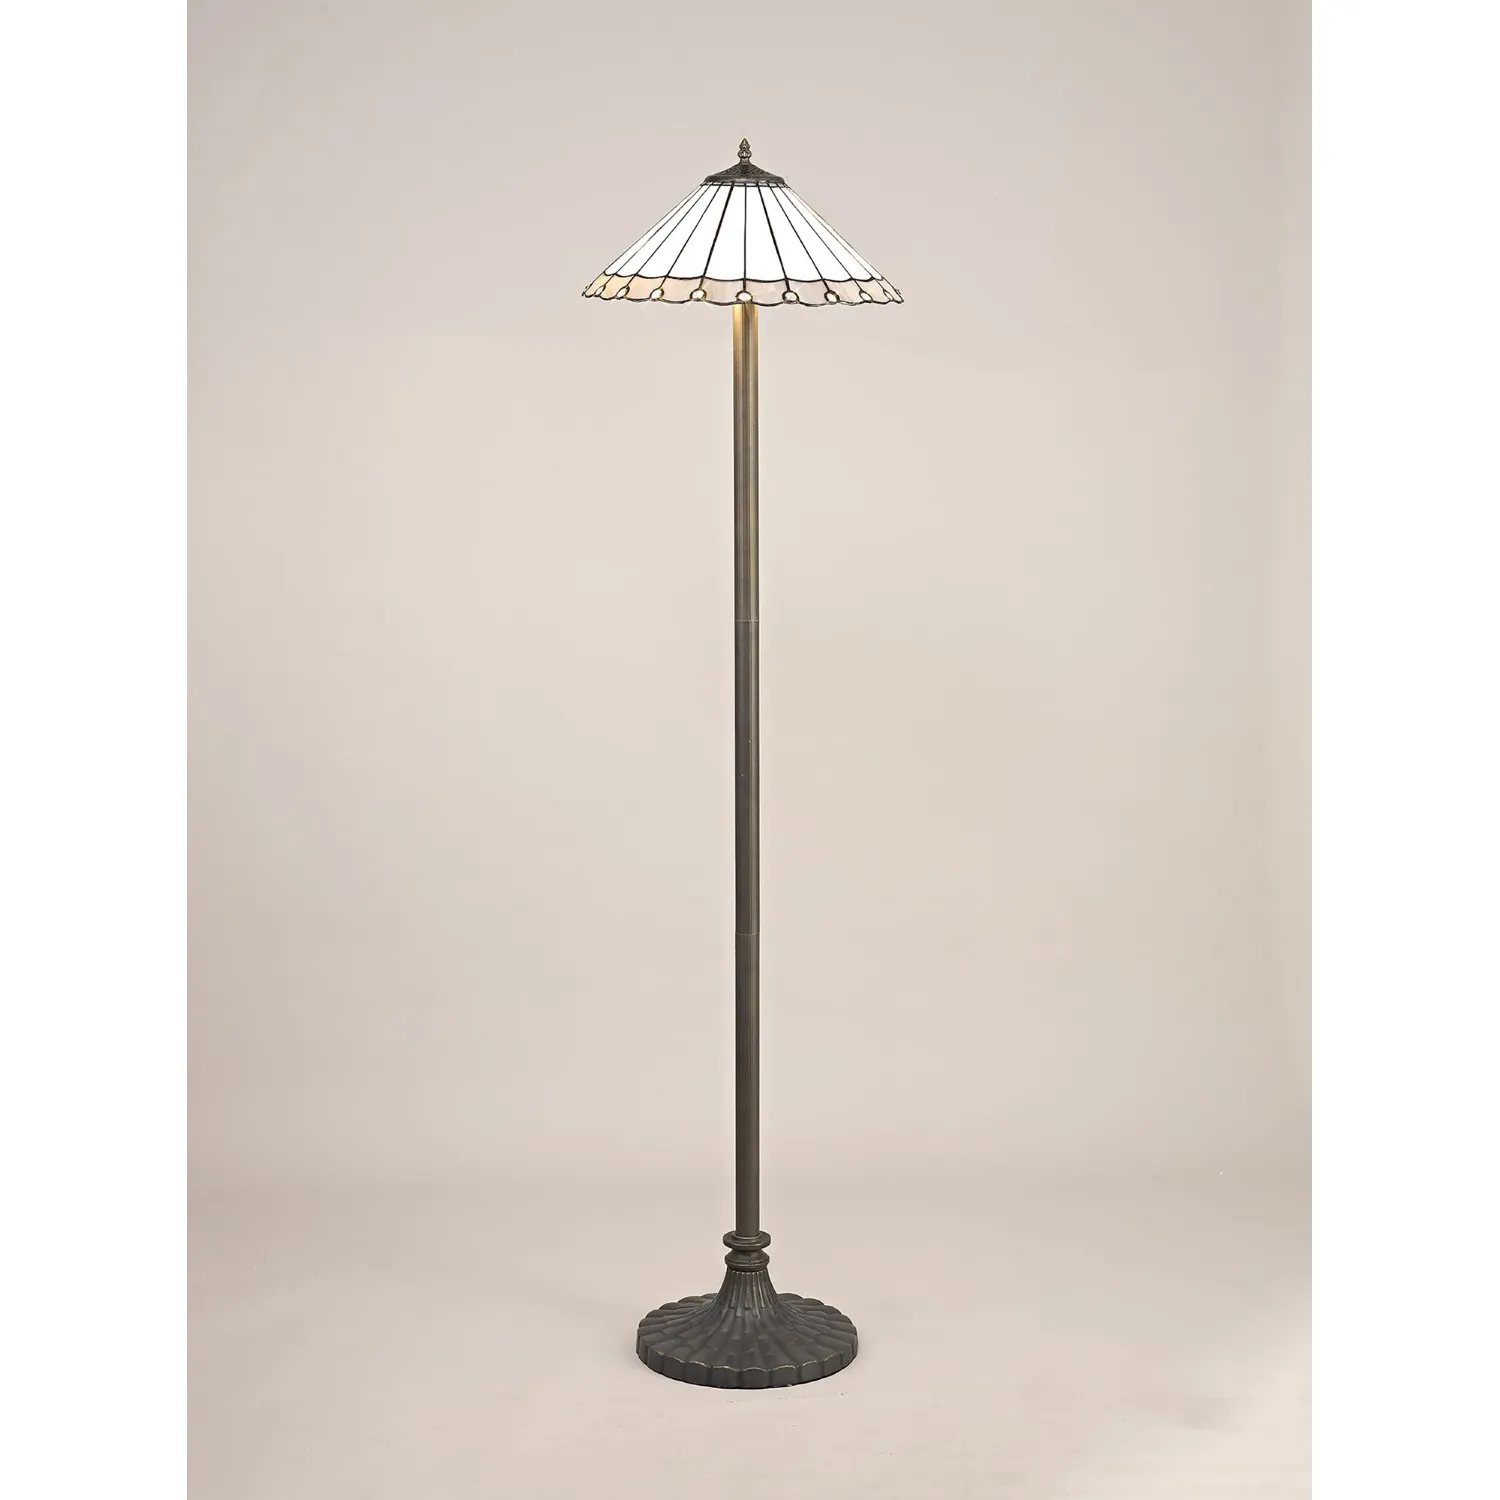 Ware 2 Light Stepped Design Floor Lamp E27 With 40cm Tiffany Shade, Grey Cream Crystal Aged Antique Brass